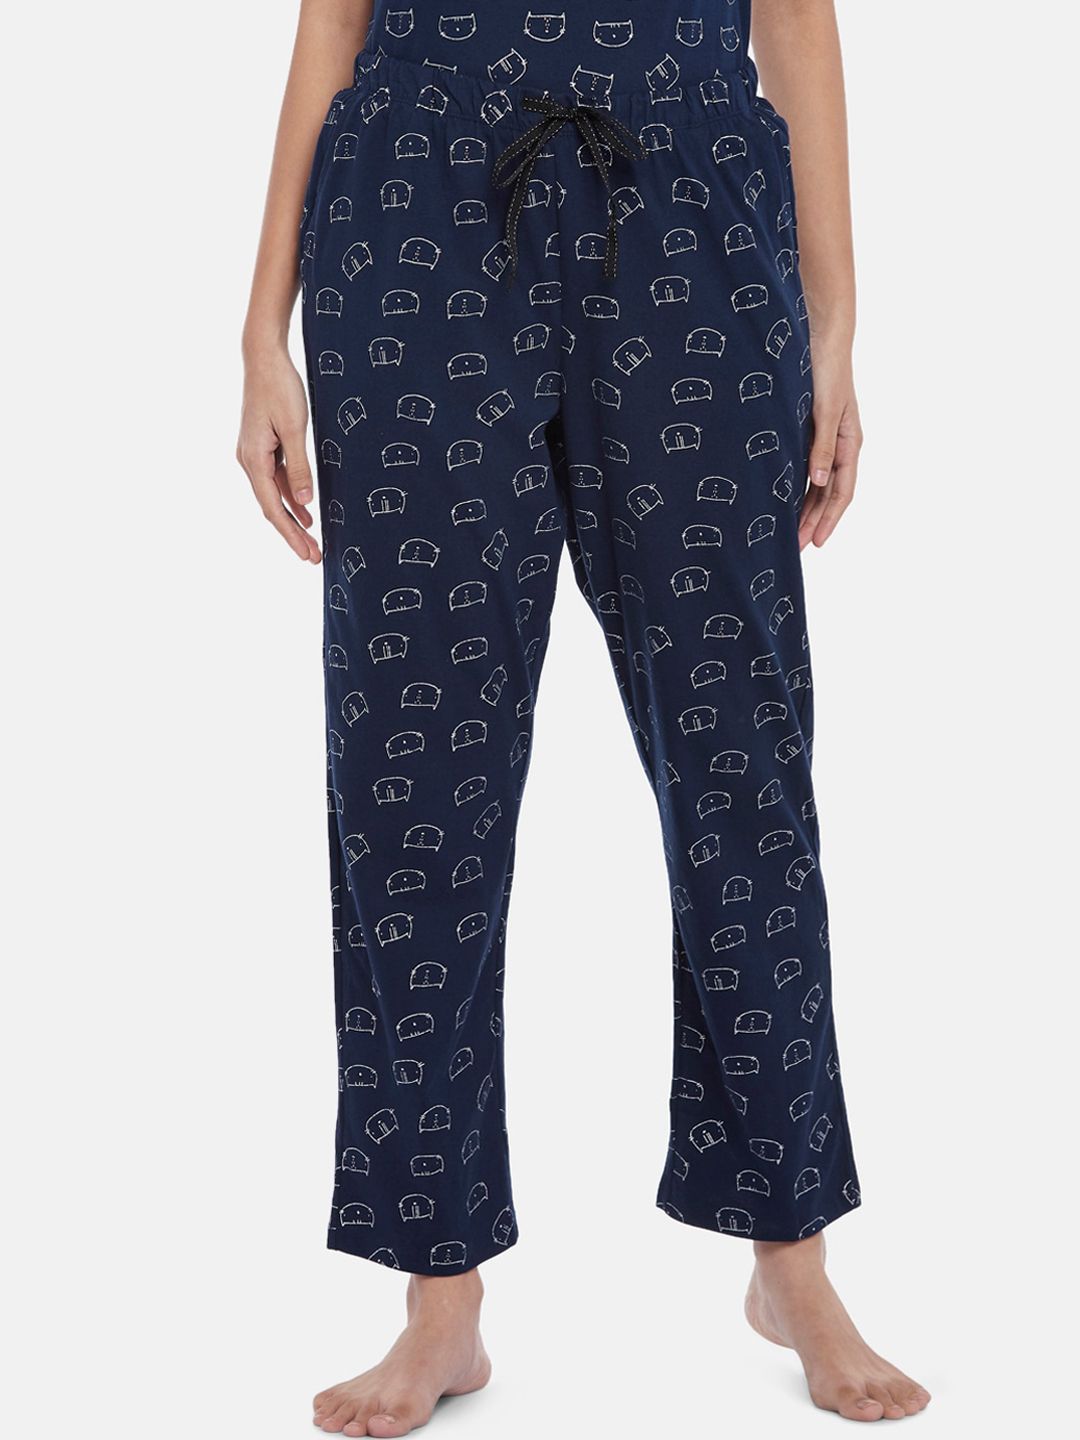 Dreamz by Pantaloons Woman Navy Printed Lounge Pants Price in India